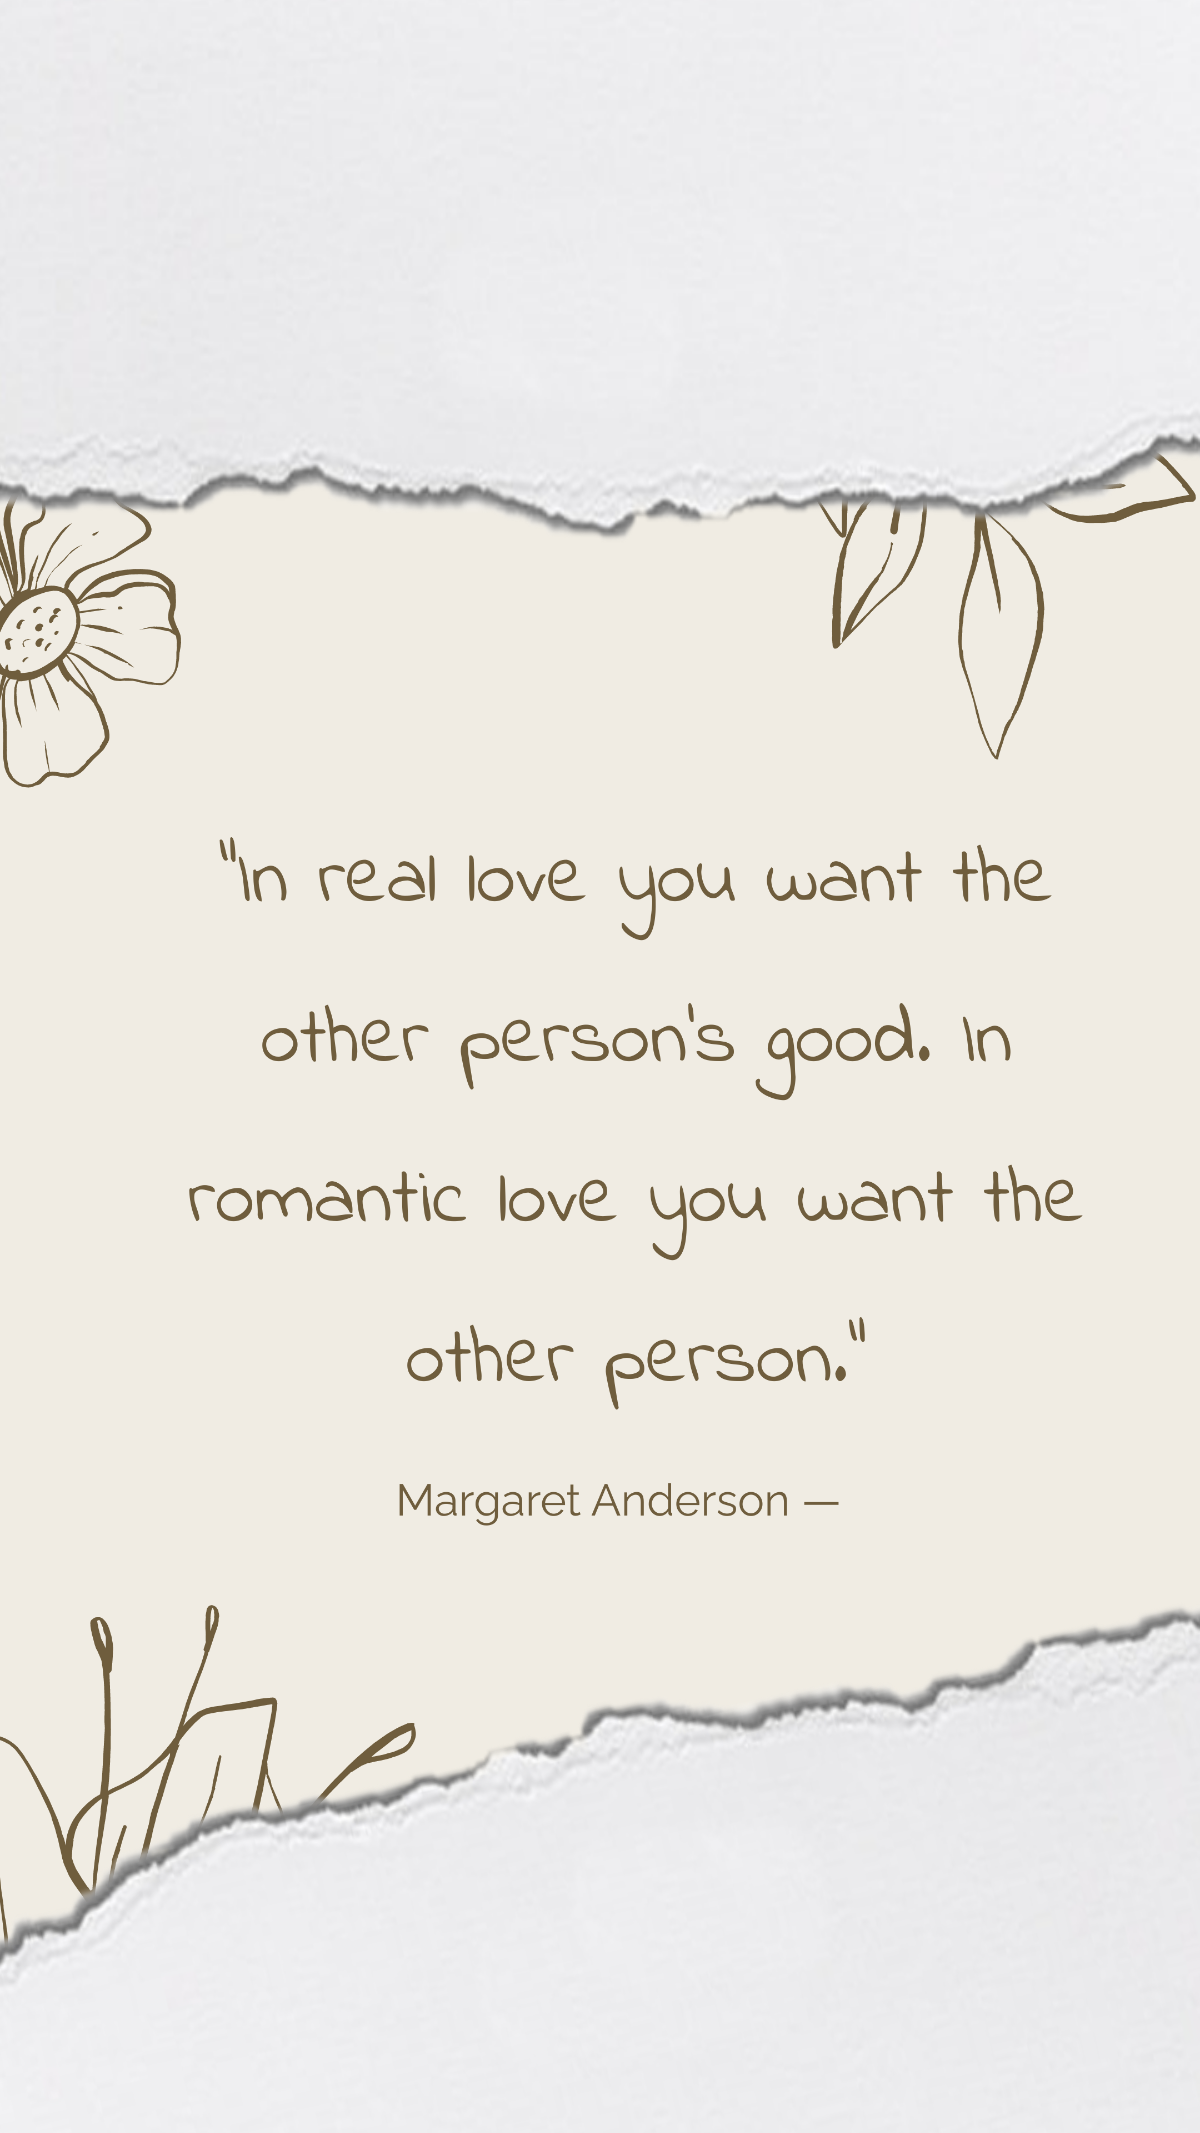 Margaret Anderson — “In real love you want the other person’s good. In romantic love you want the other person.”